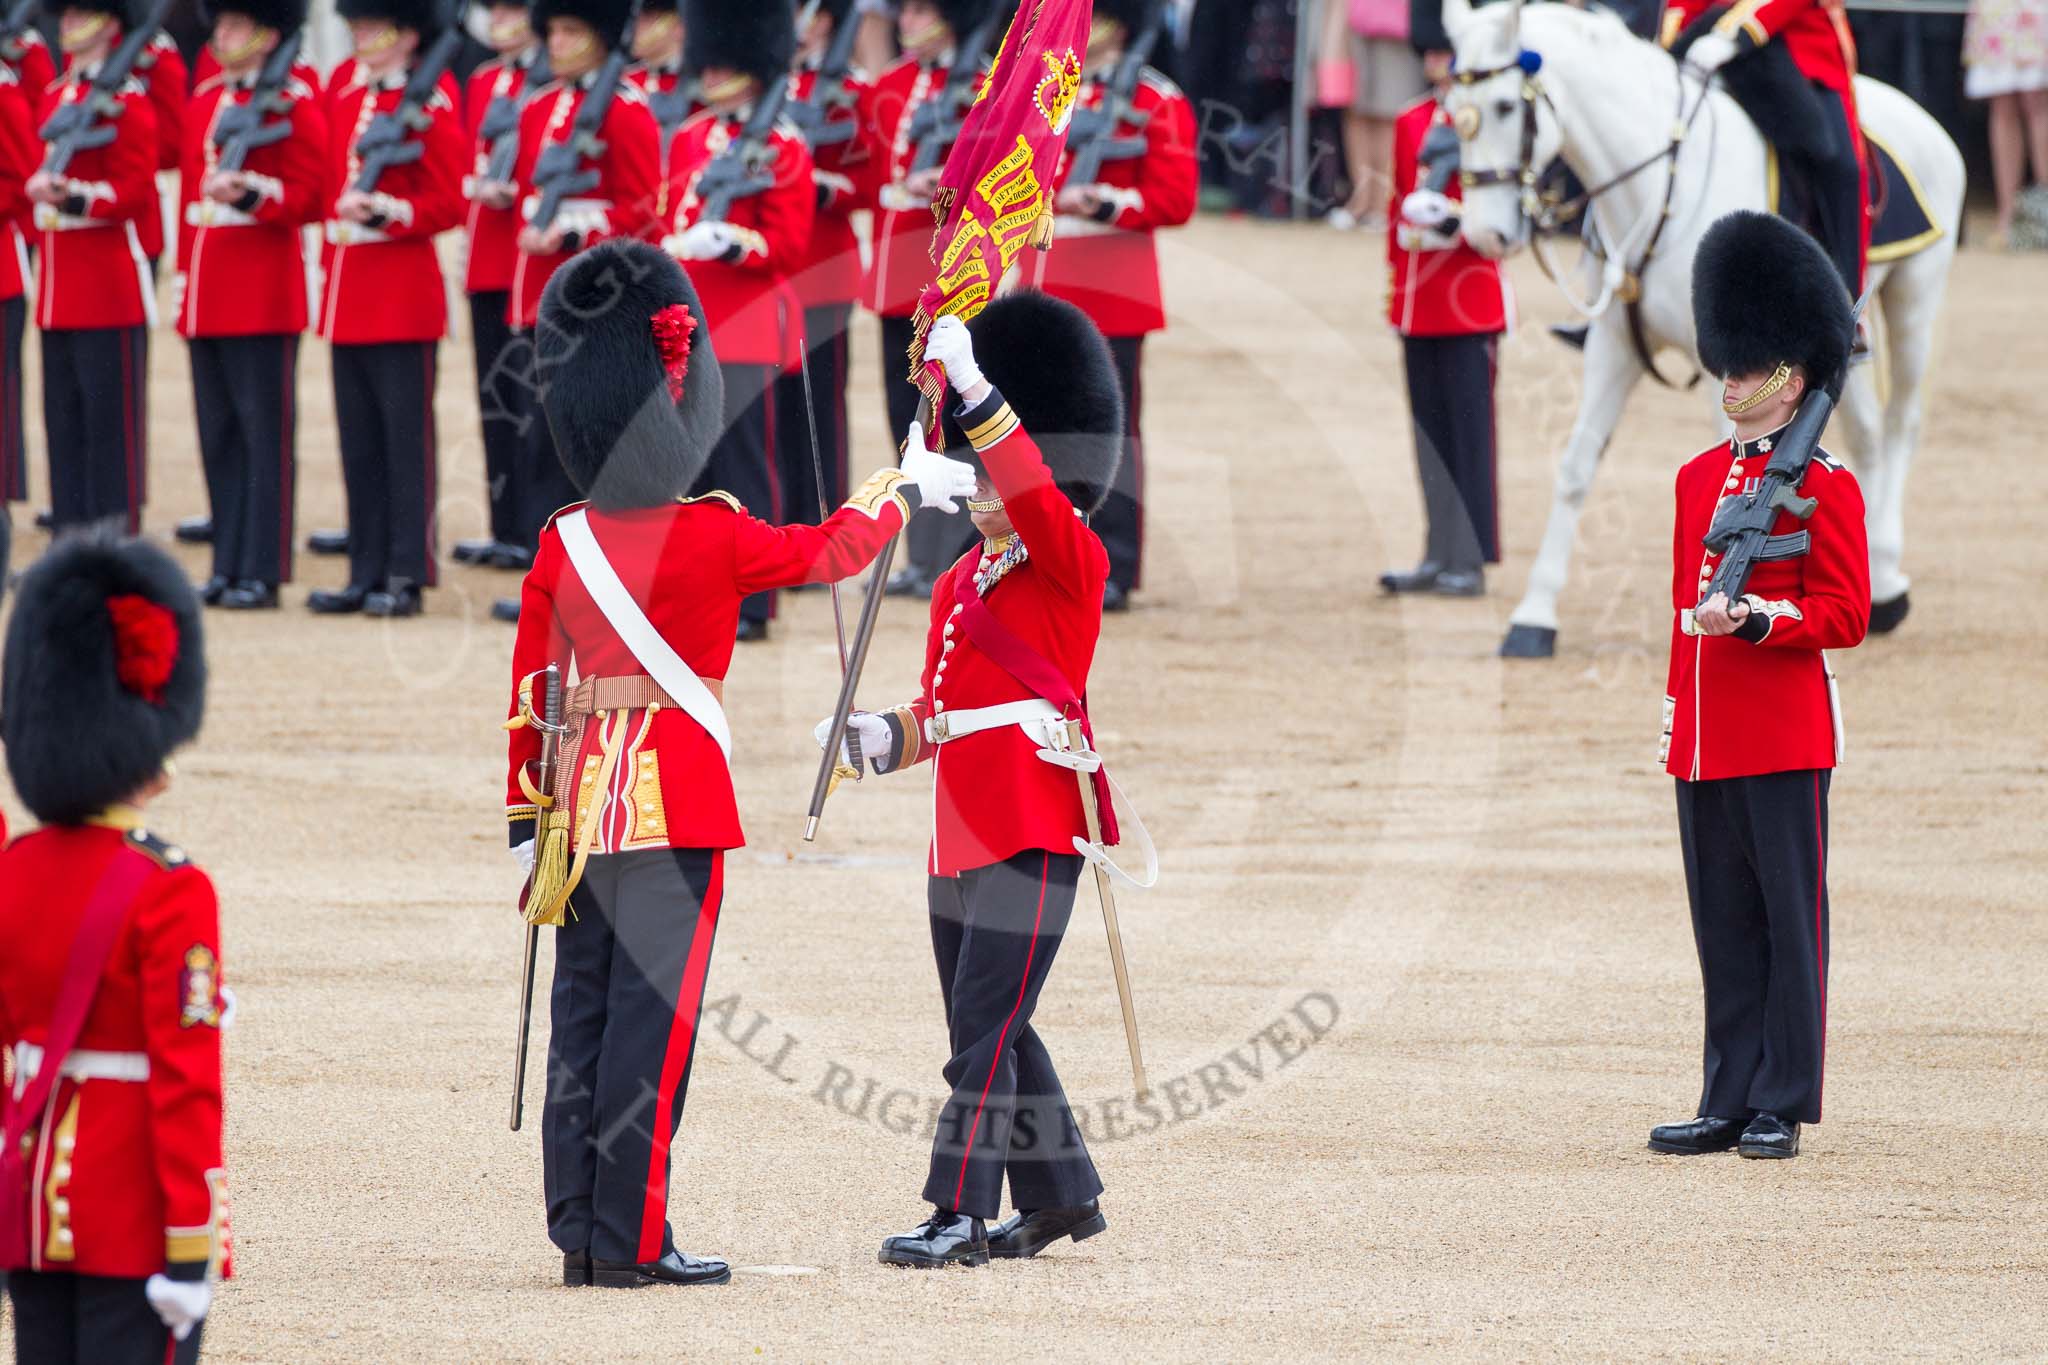 Trooping the Colour 2012: The Regimental Sergeant Major of No. 1 Guard, the Escort for the Colour, steps forward to hand the the Colour to the Ensign..
Horse Guards Parade, Westminster,
London SW1,

United Kingdom,
on 16 June 2012 at 11:21, image #307